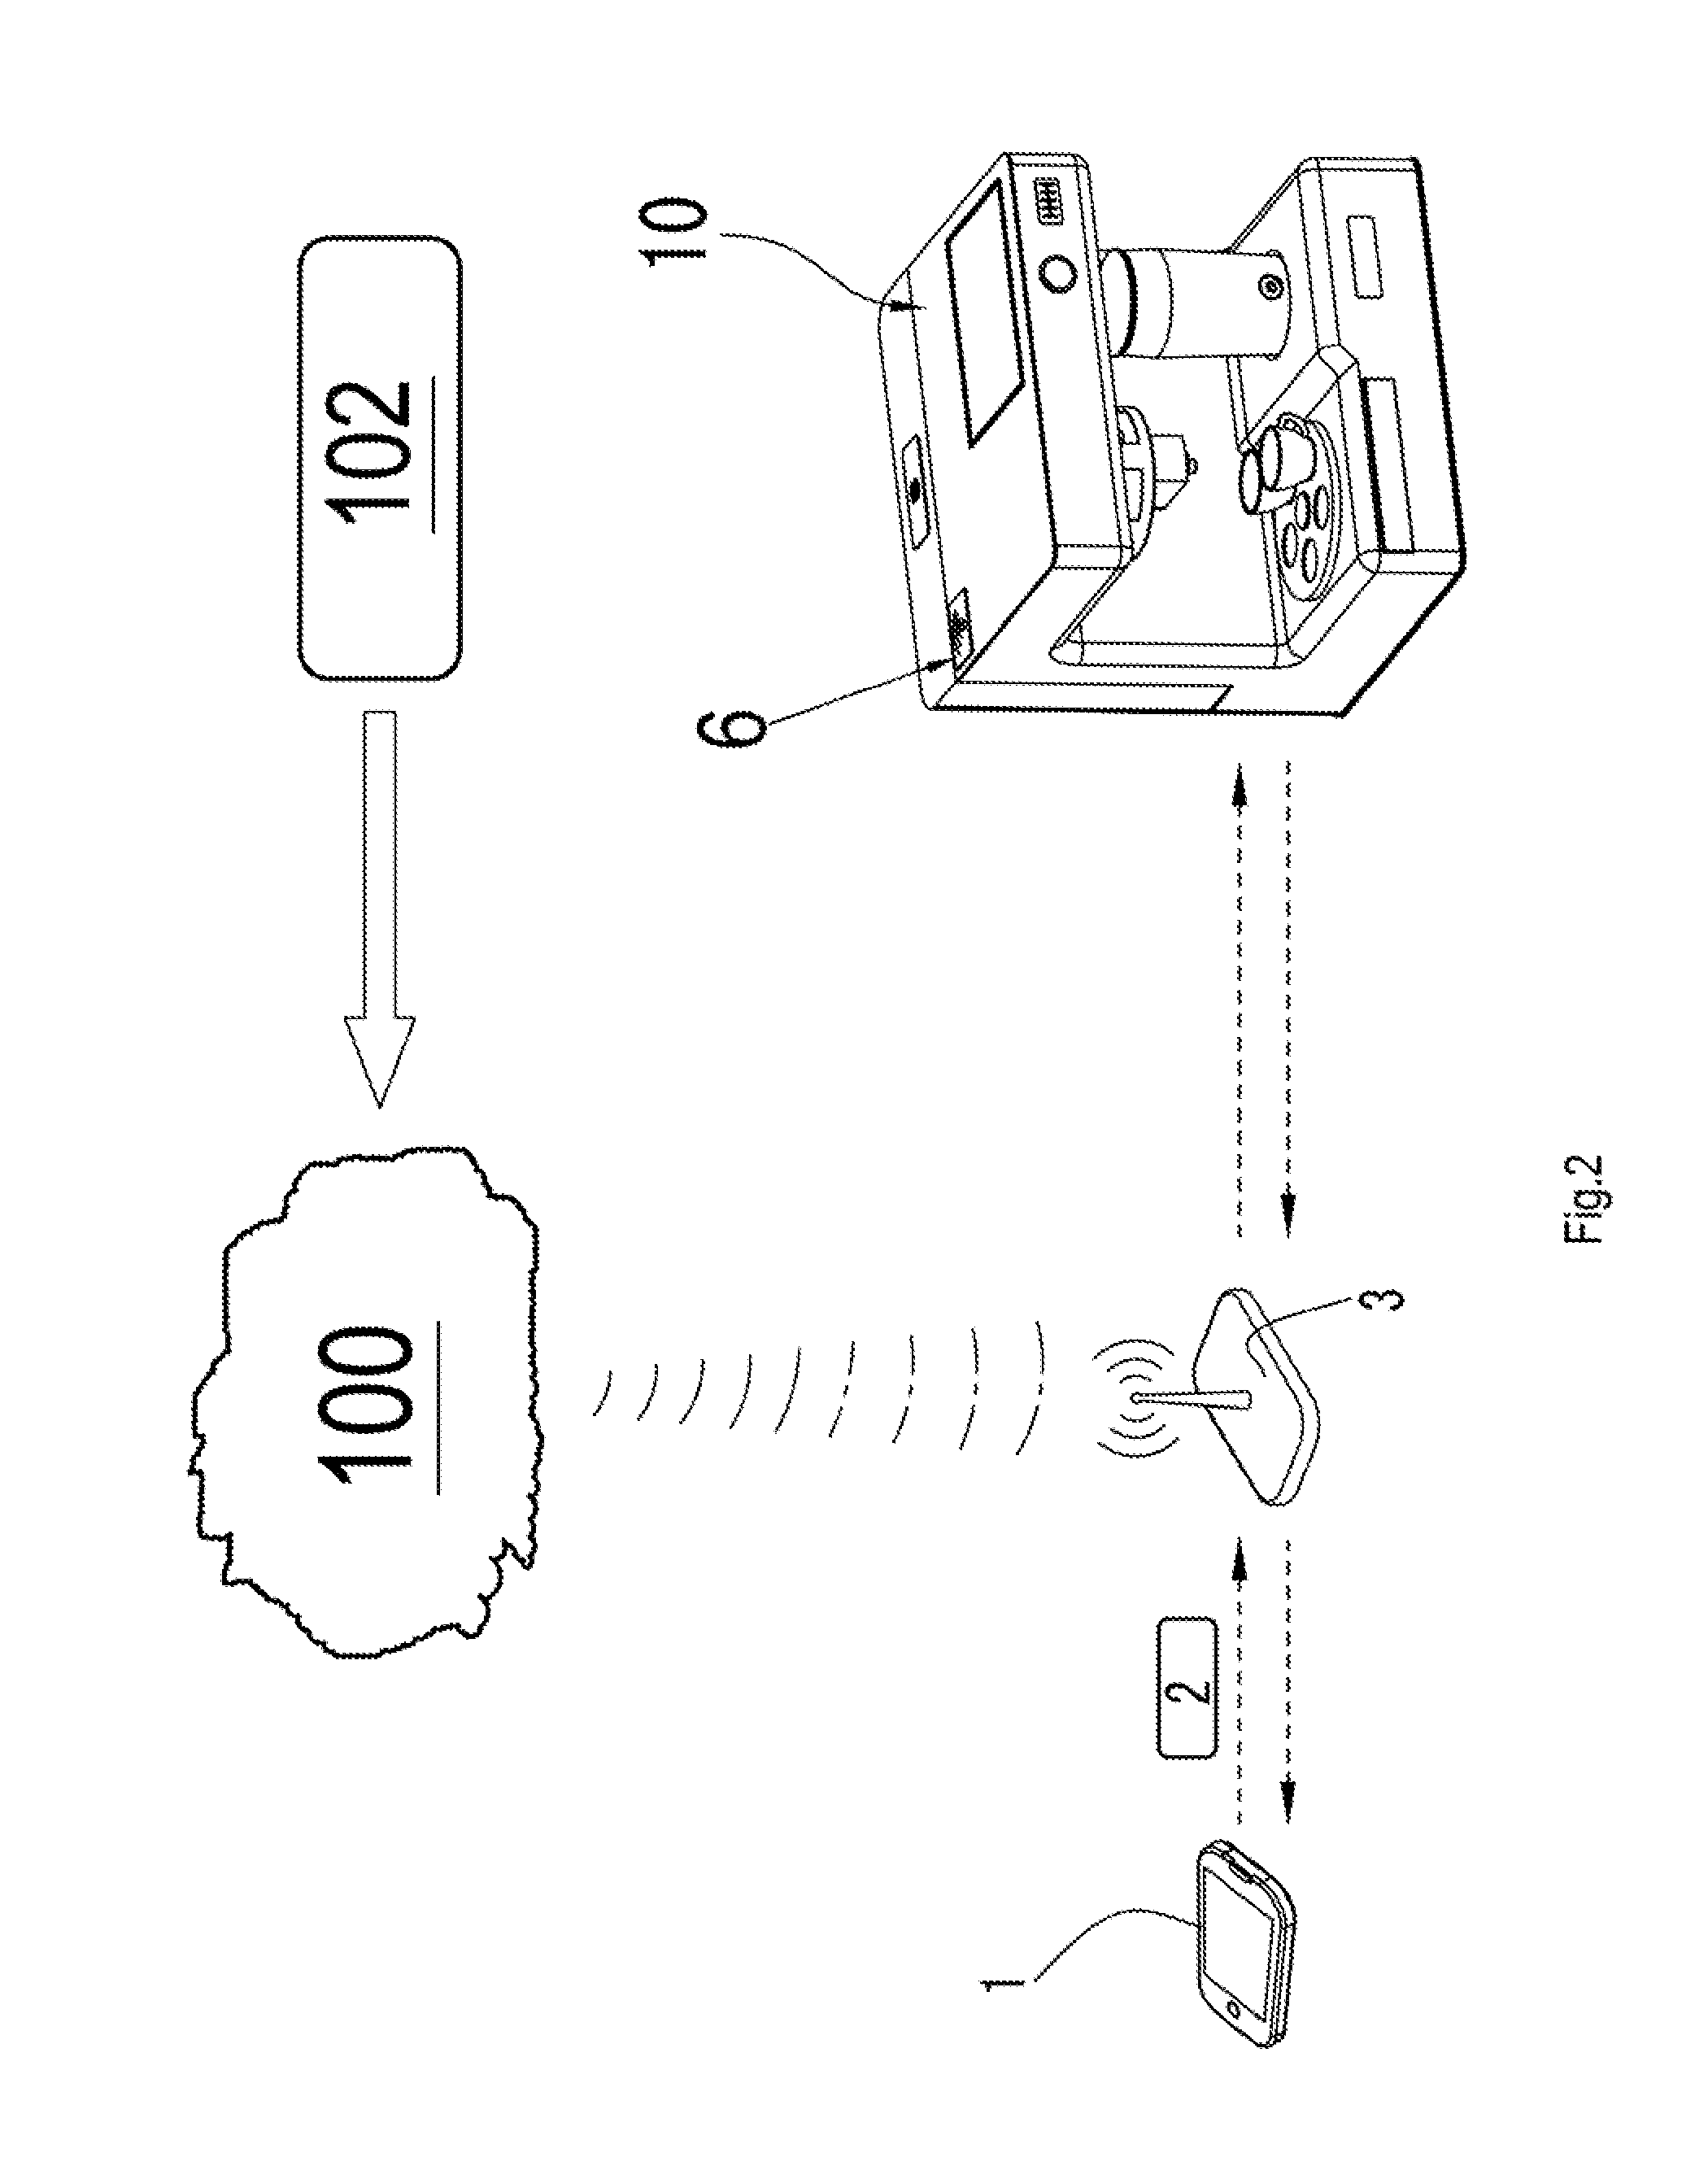 Network connected coffee maker for processing a coffee product